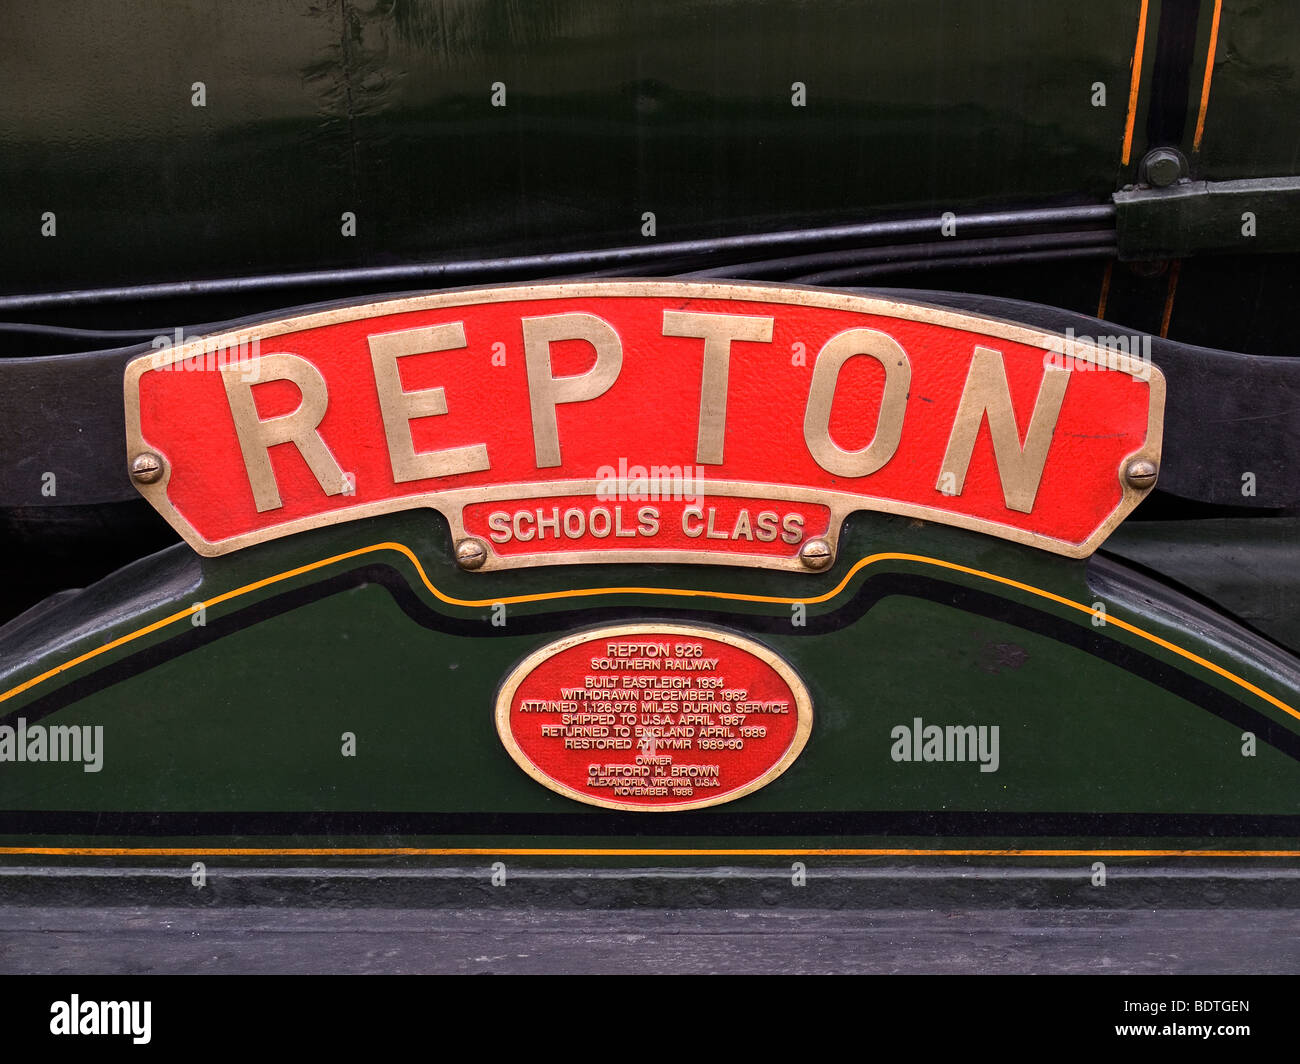 Nameplate of ex Southern Railway Schools Class steam locomotive 926 Repton at Pickering North Yorkshire Moors Railway 2009 Stock Photo